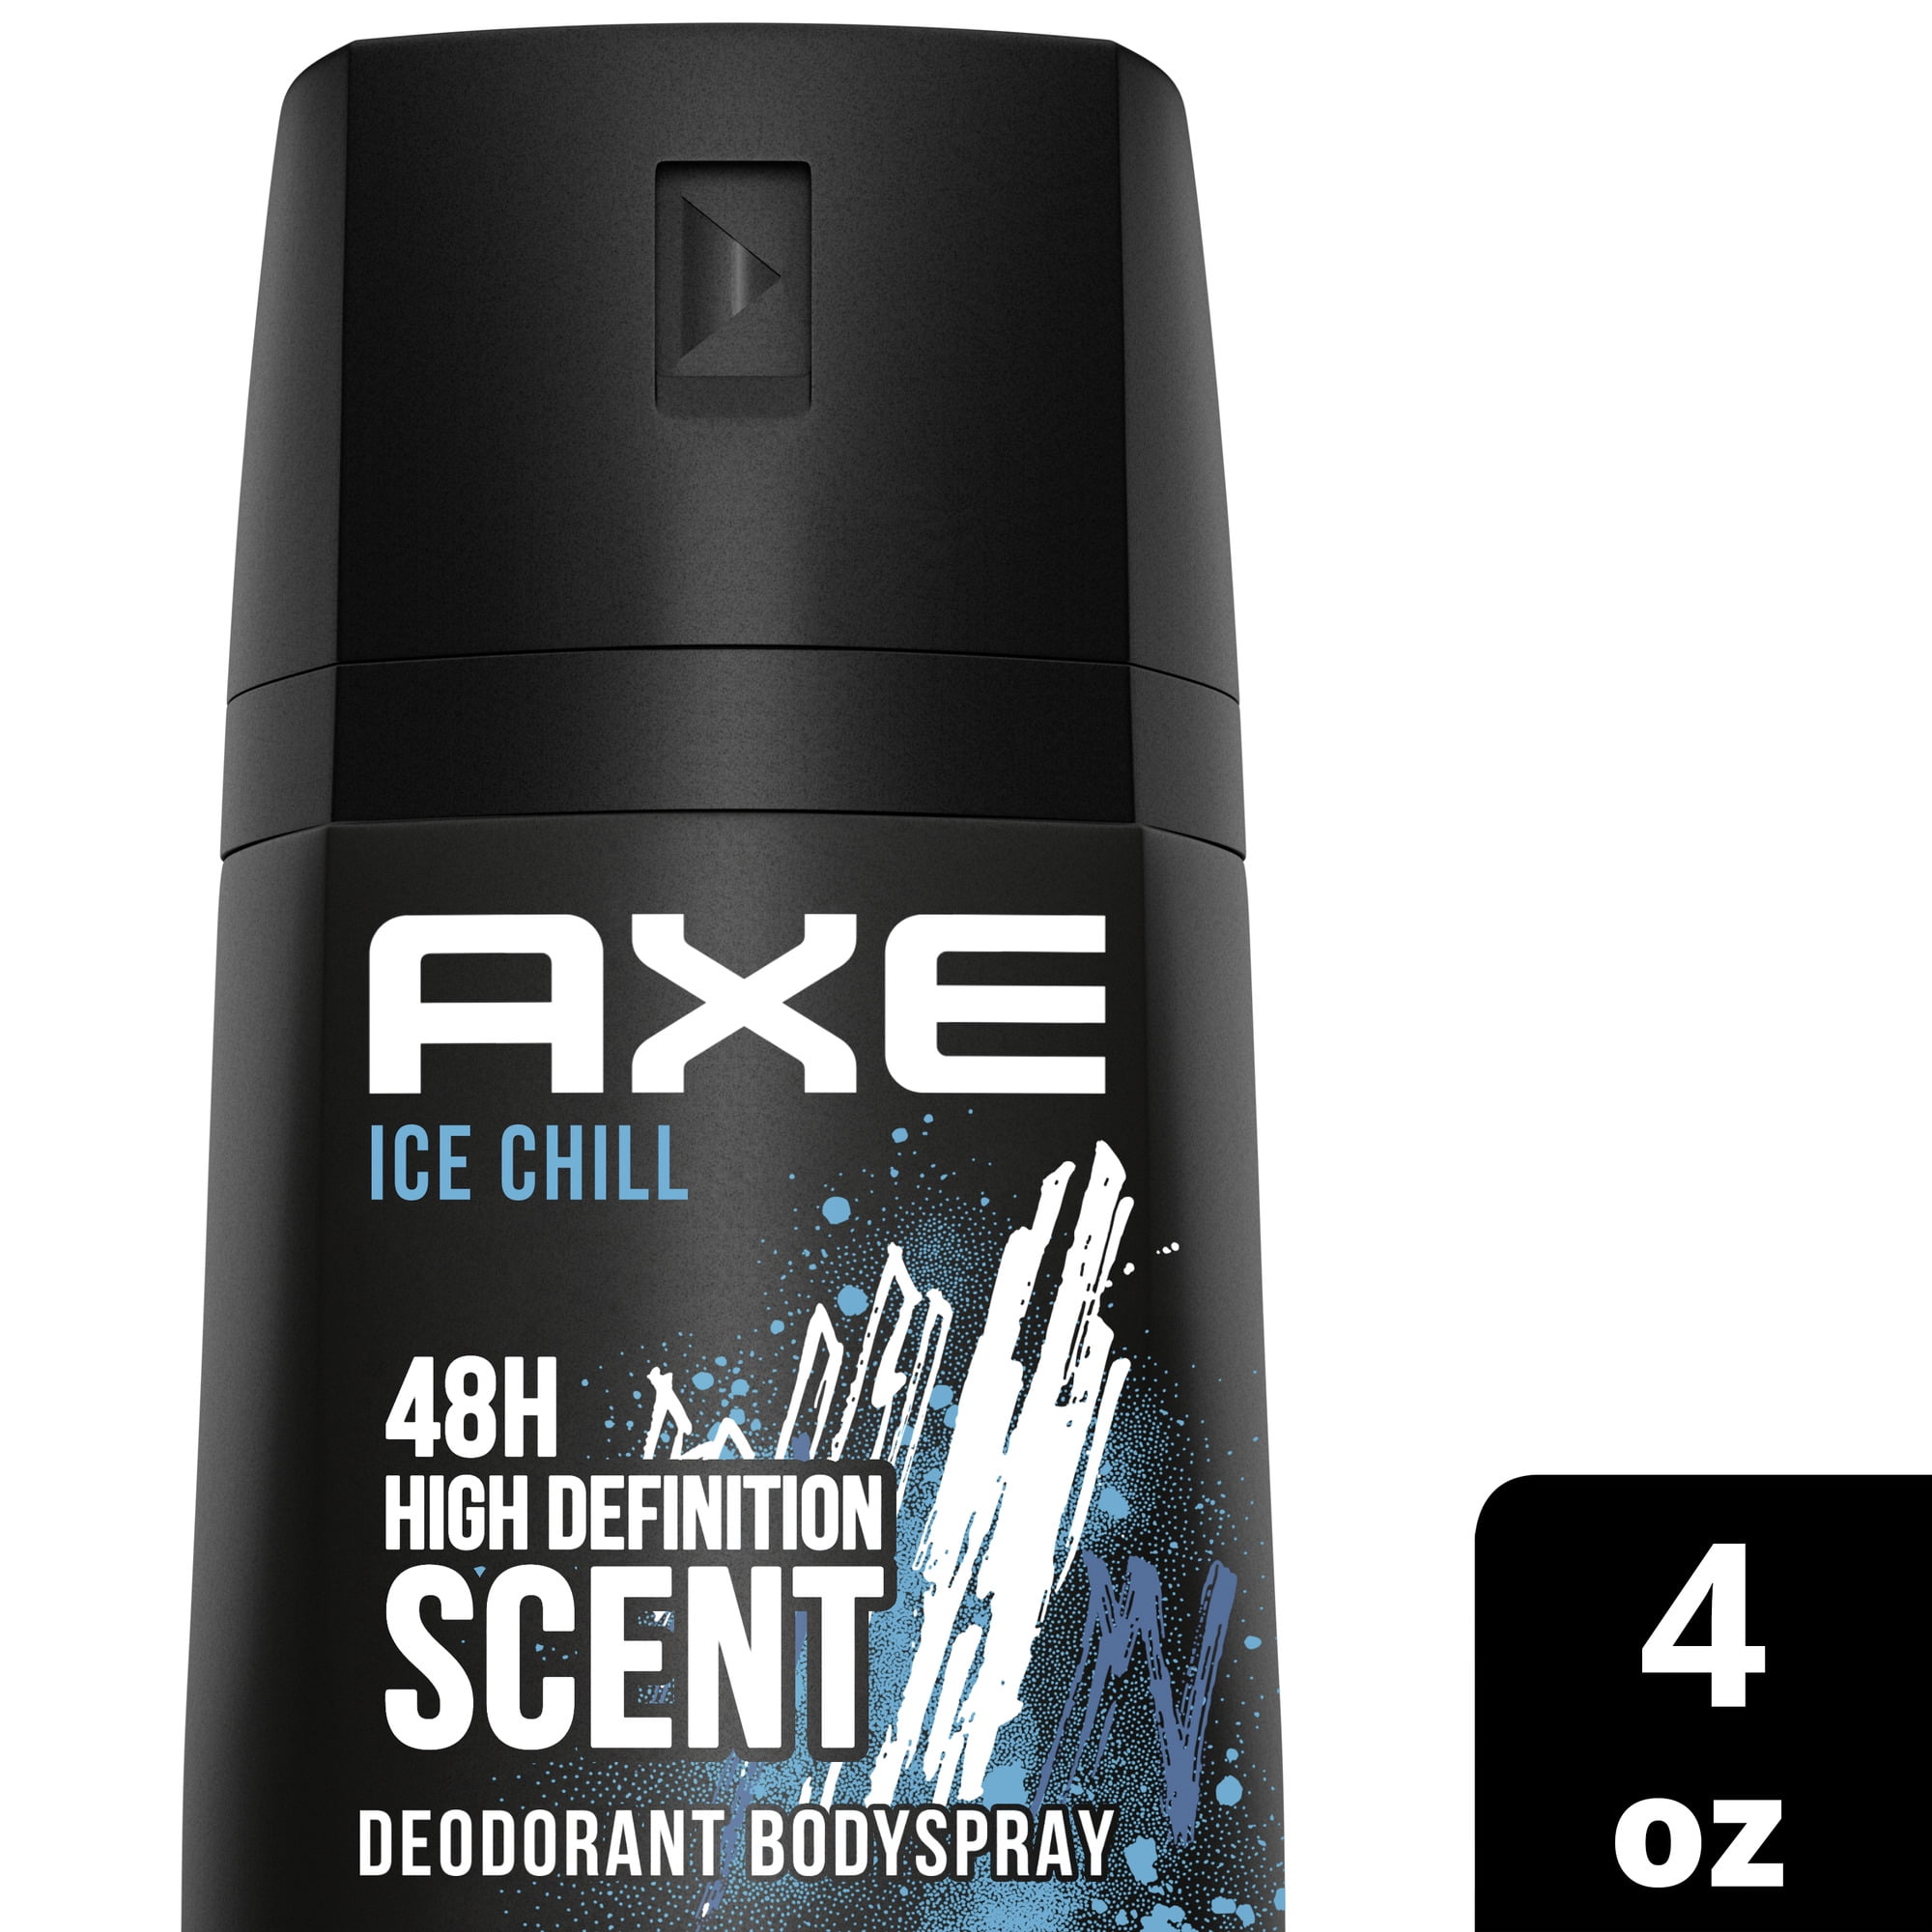 Roest fout Tulpen AXE Dual Action Body Spray Deodorant for Men, Ice Chill Icy Menthol  Formulated without Aluminum, 4.0 oz - Walmart.com